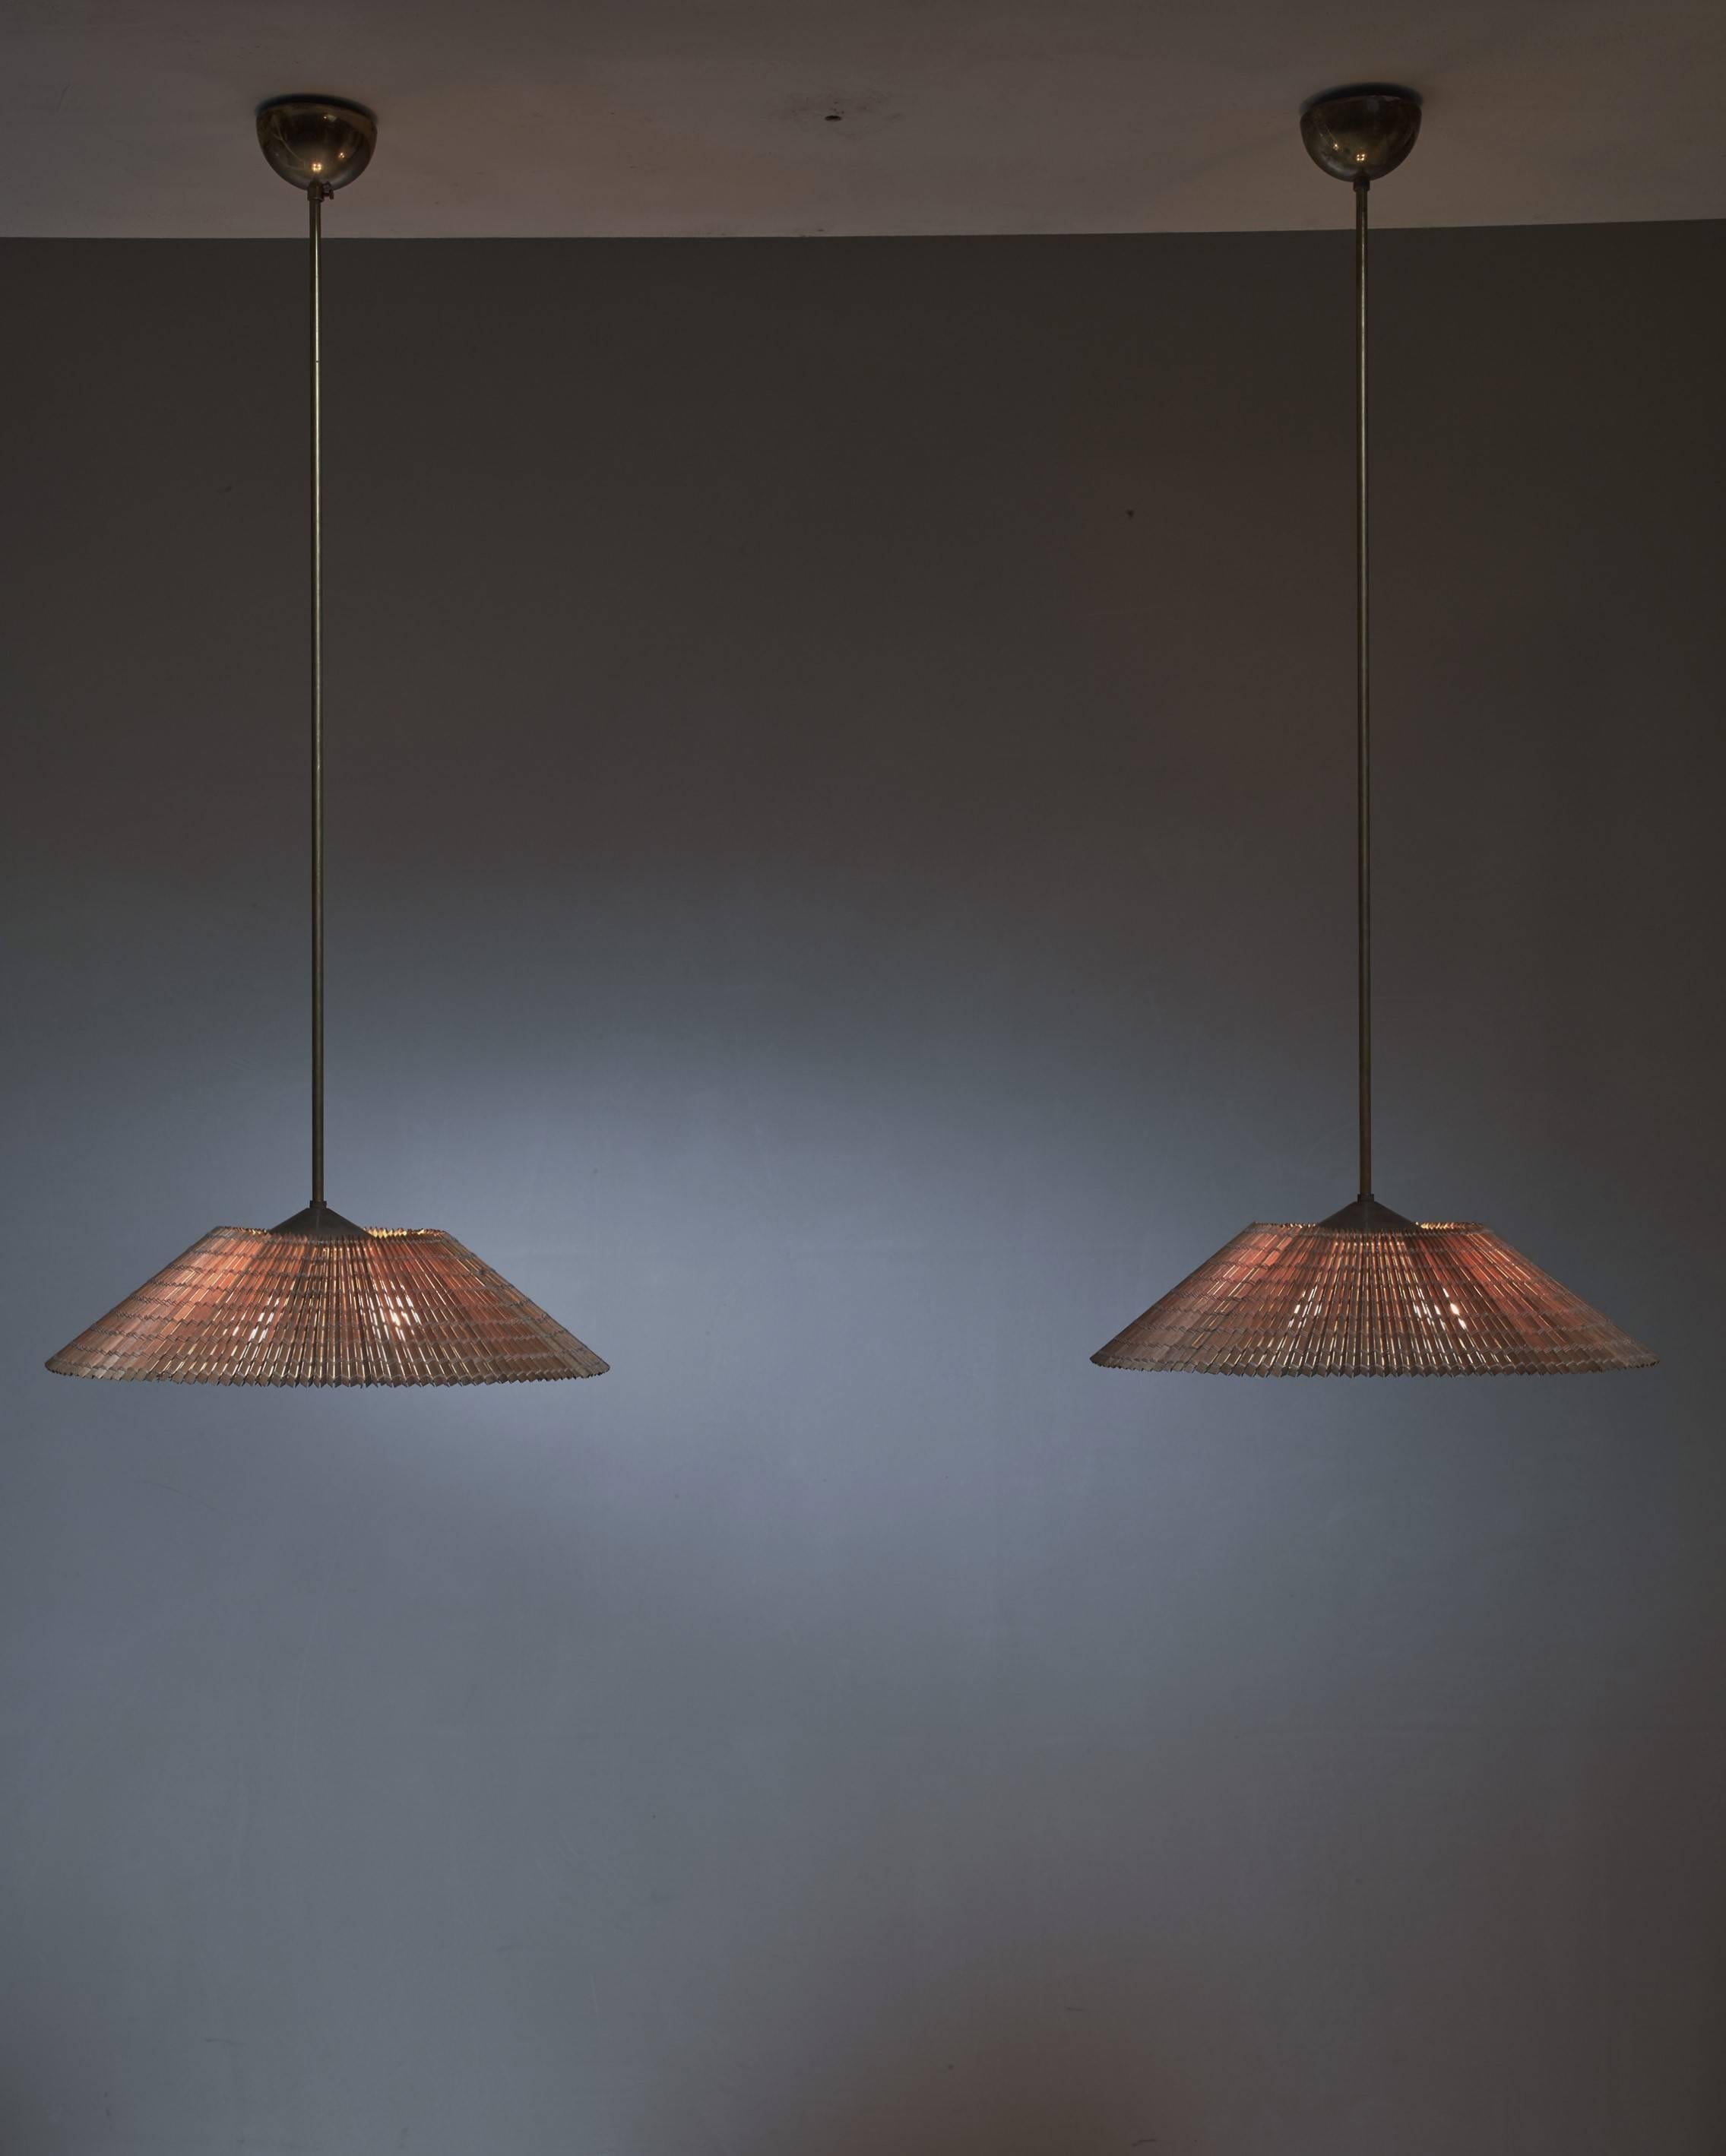 A pair of Paavo Tynell pendant lamps with four light bulbs for Idman. The shades of the lamps are made of thin strips of wood, held together by woven threads.
The lamps have a frosted glass diffuser underneath, a brass cap on top and are connected